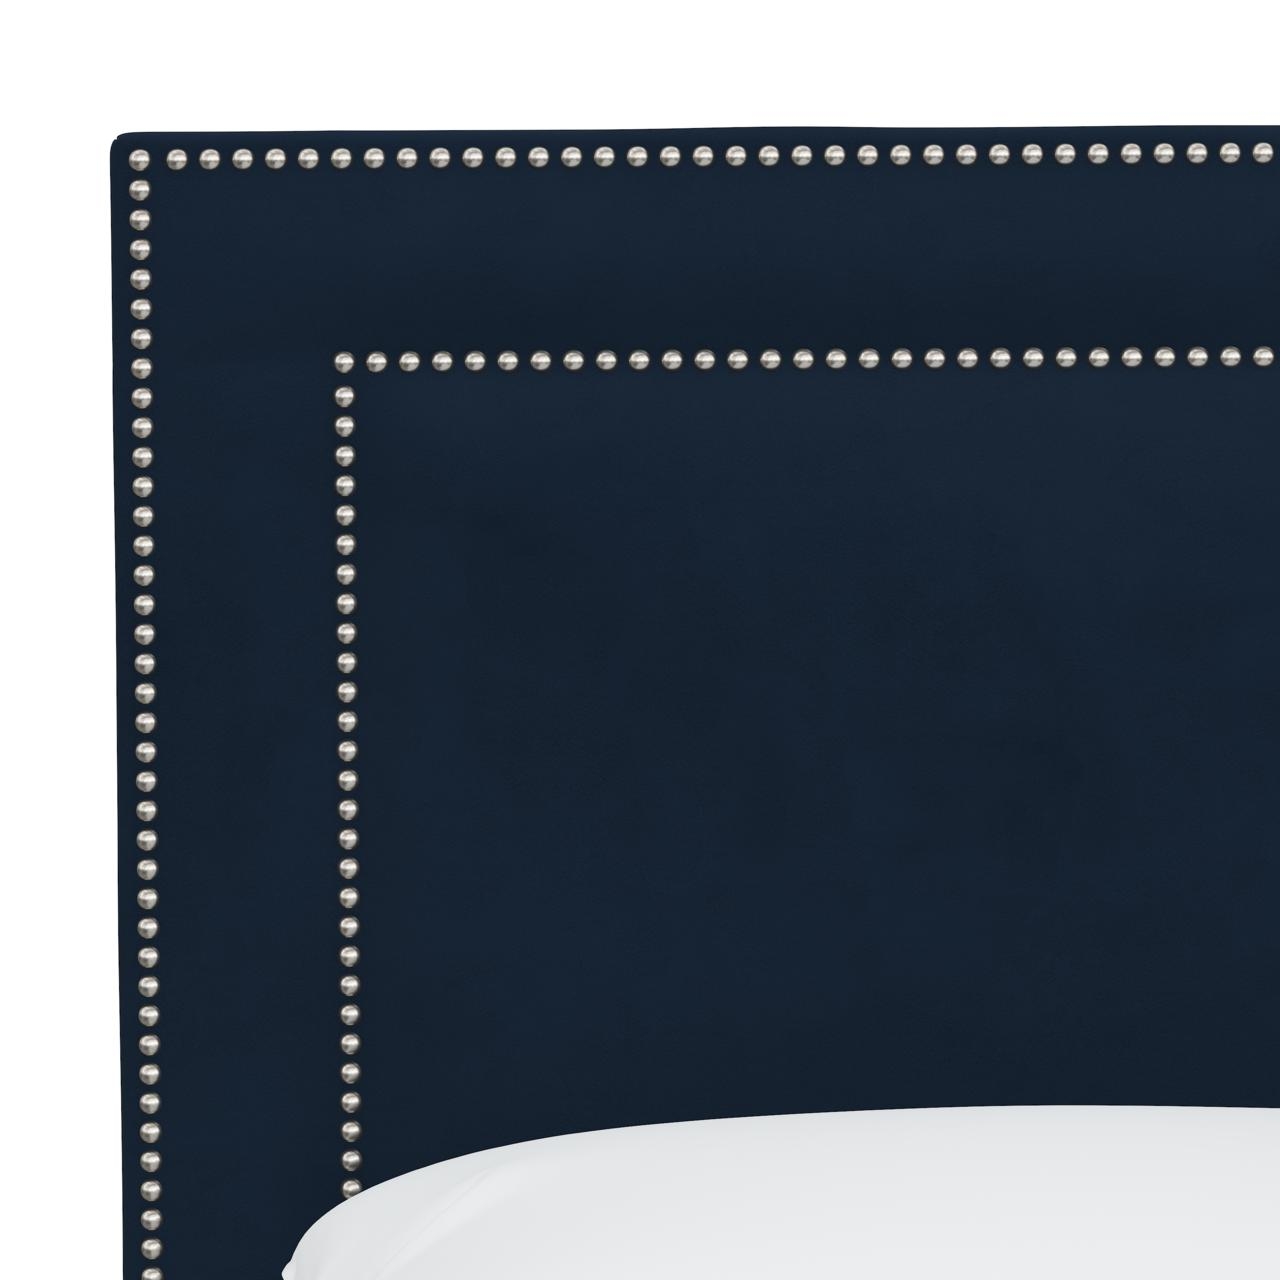 Williams Bed, Twin, Velvet Ink, Pewter Nailheads - Image 3